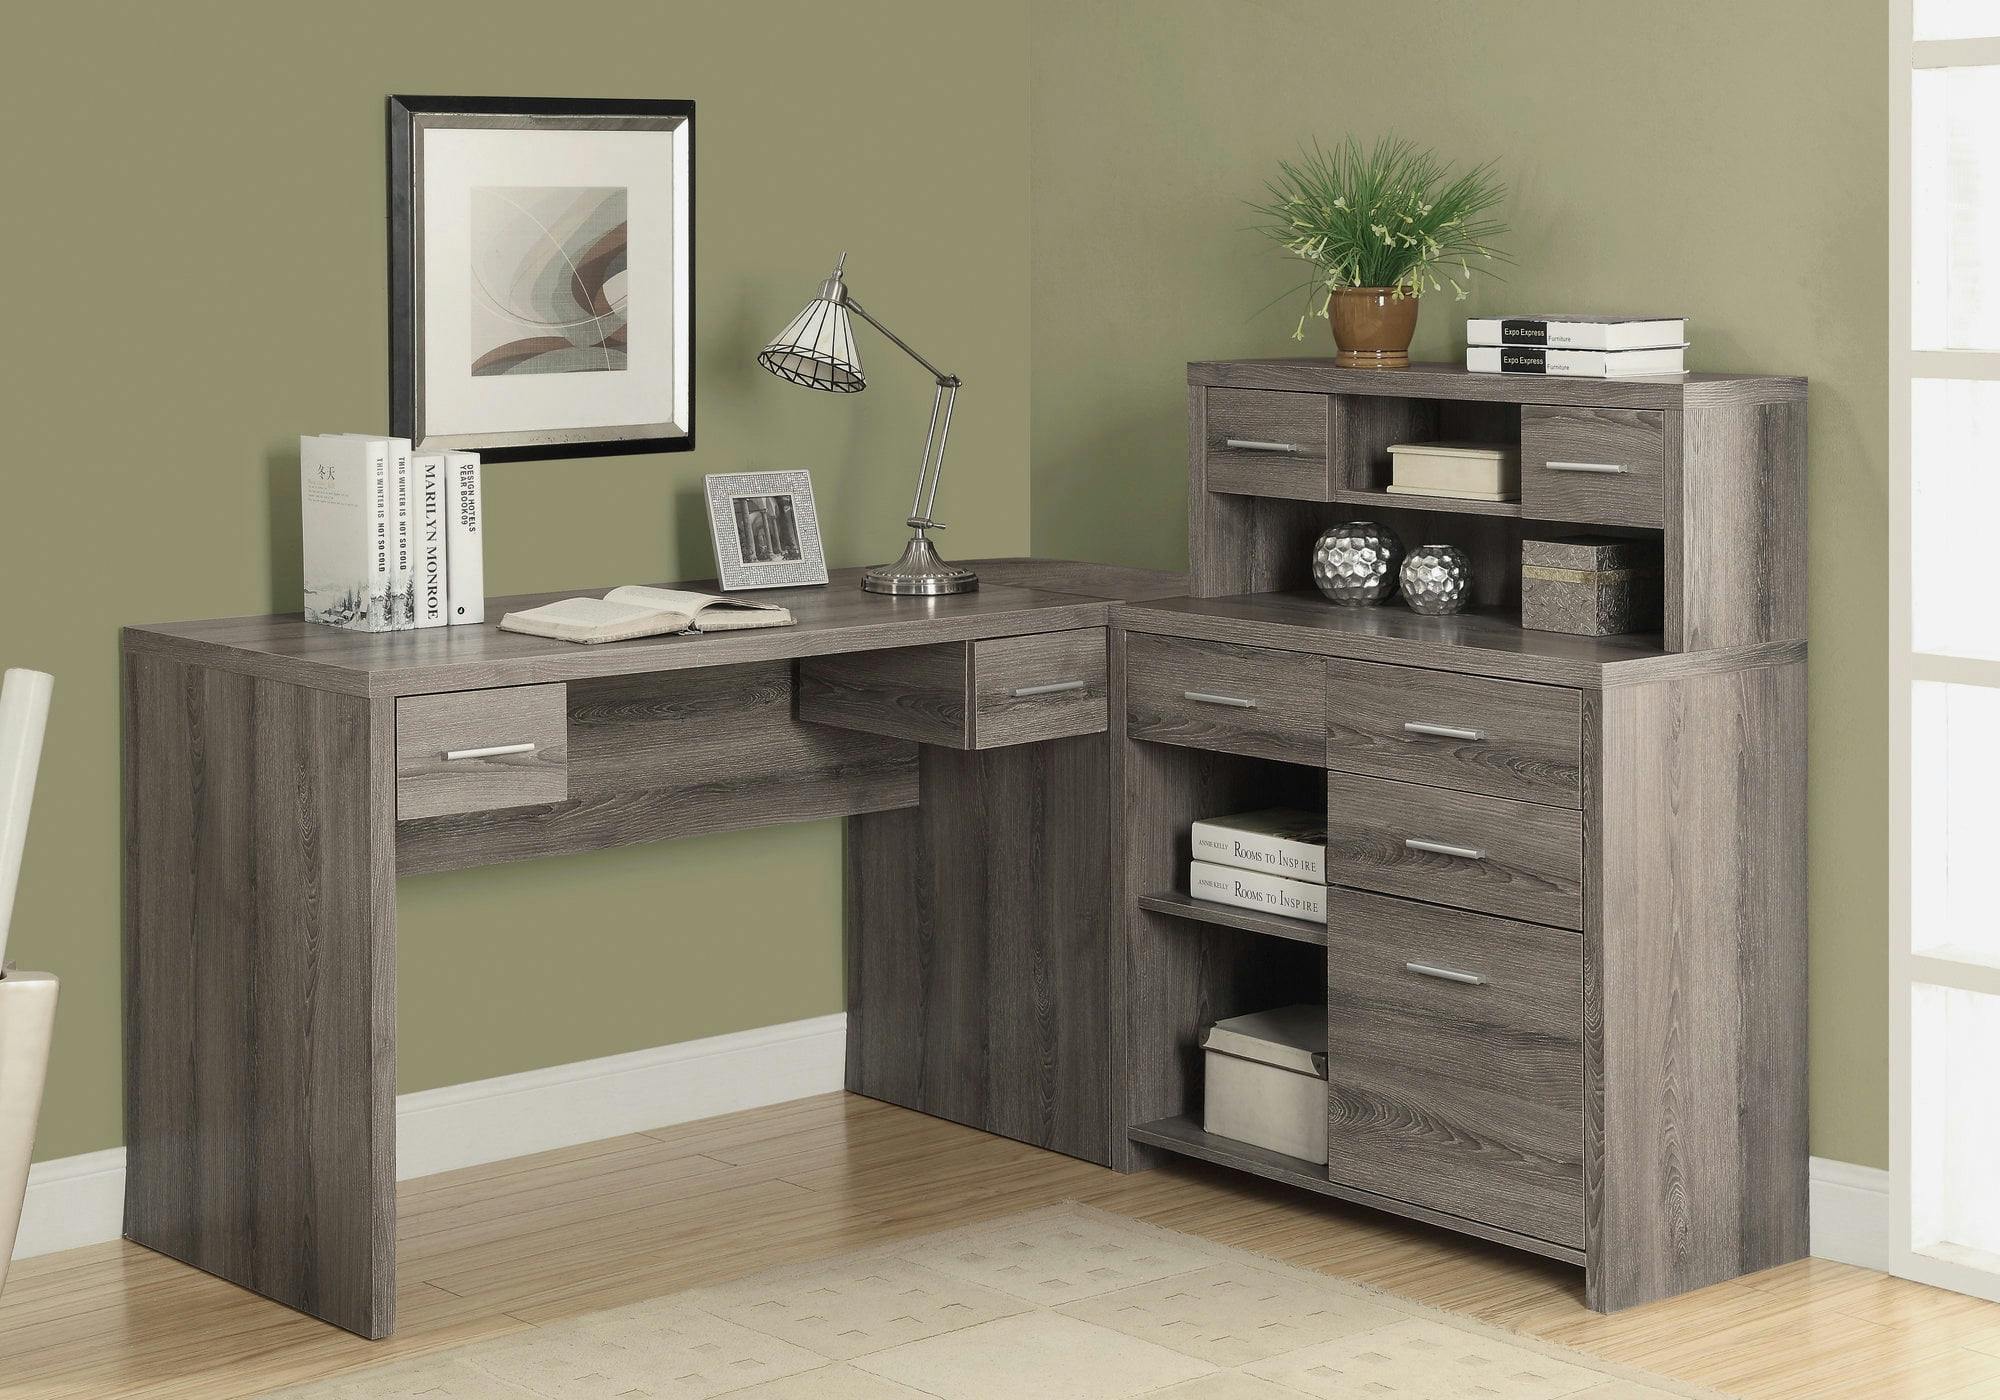 Executive L-Shaped Corner Desk with Hutch and Drawers in Dark Taupe